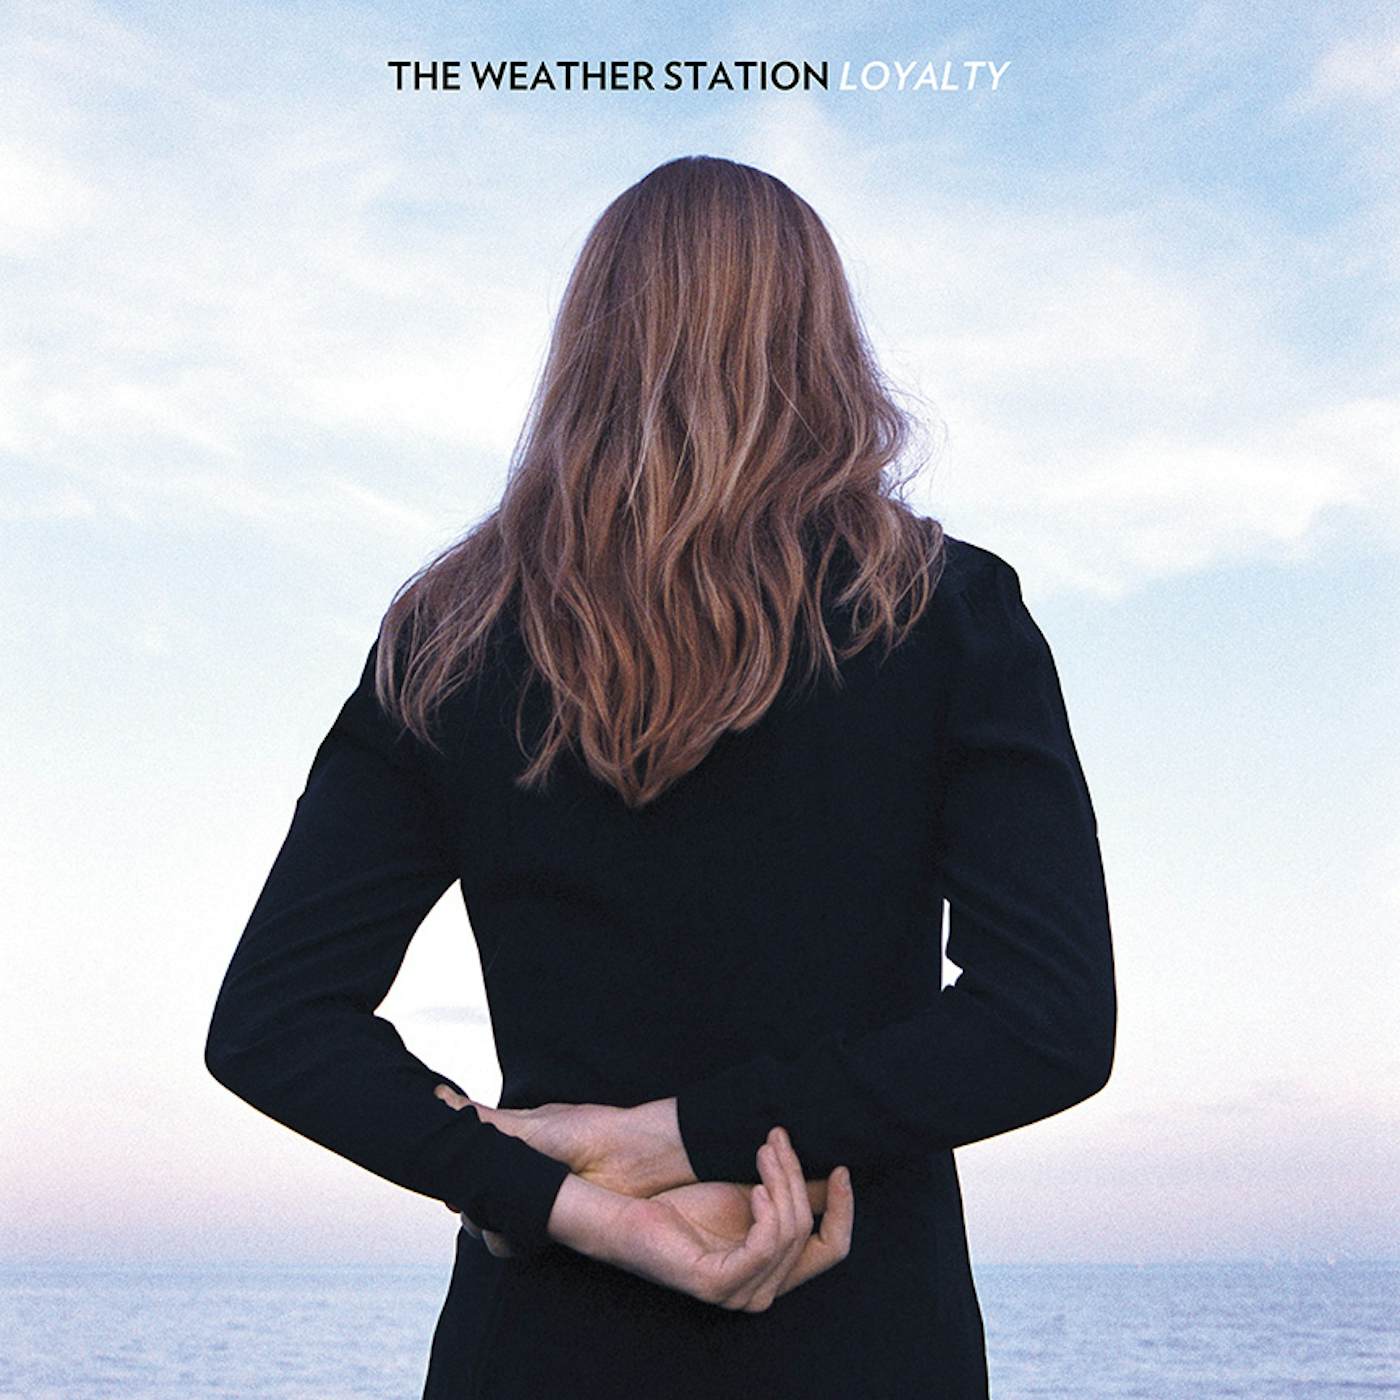 The Weather Station Loyalty Vinyl Record